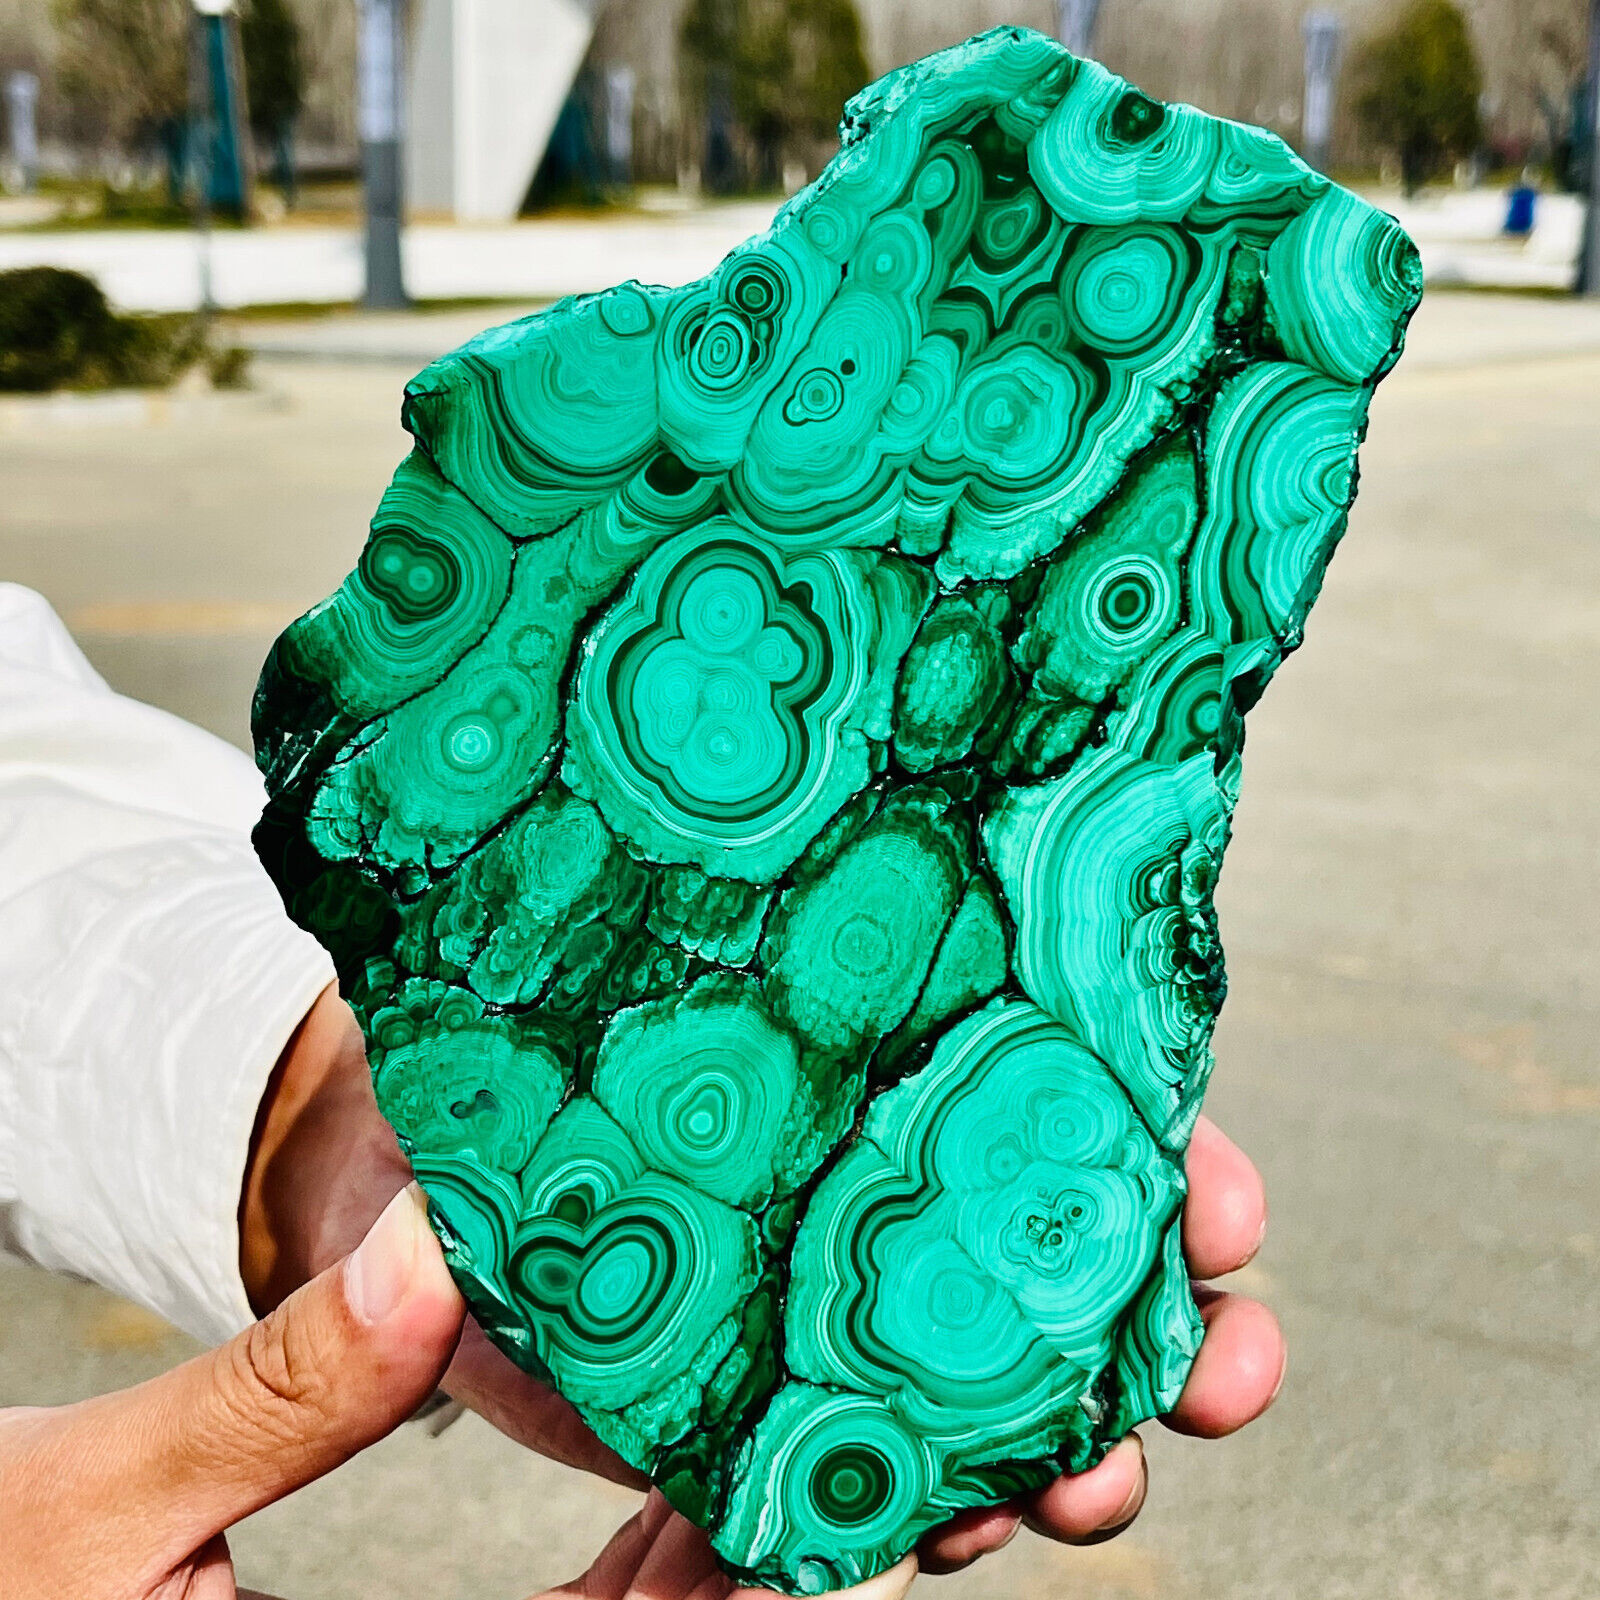 1.56LB Natural glossy Malachite transparent cluster rough mineral sample